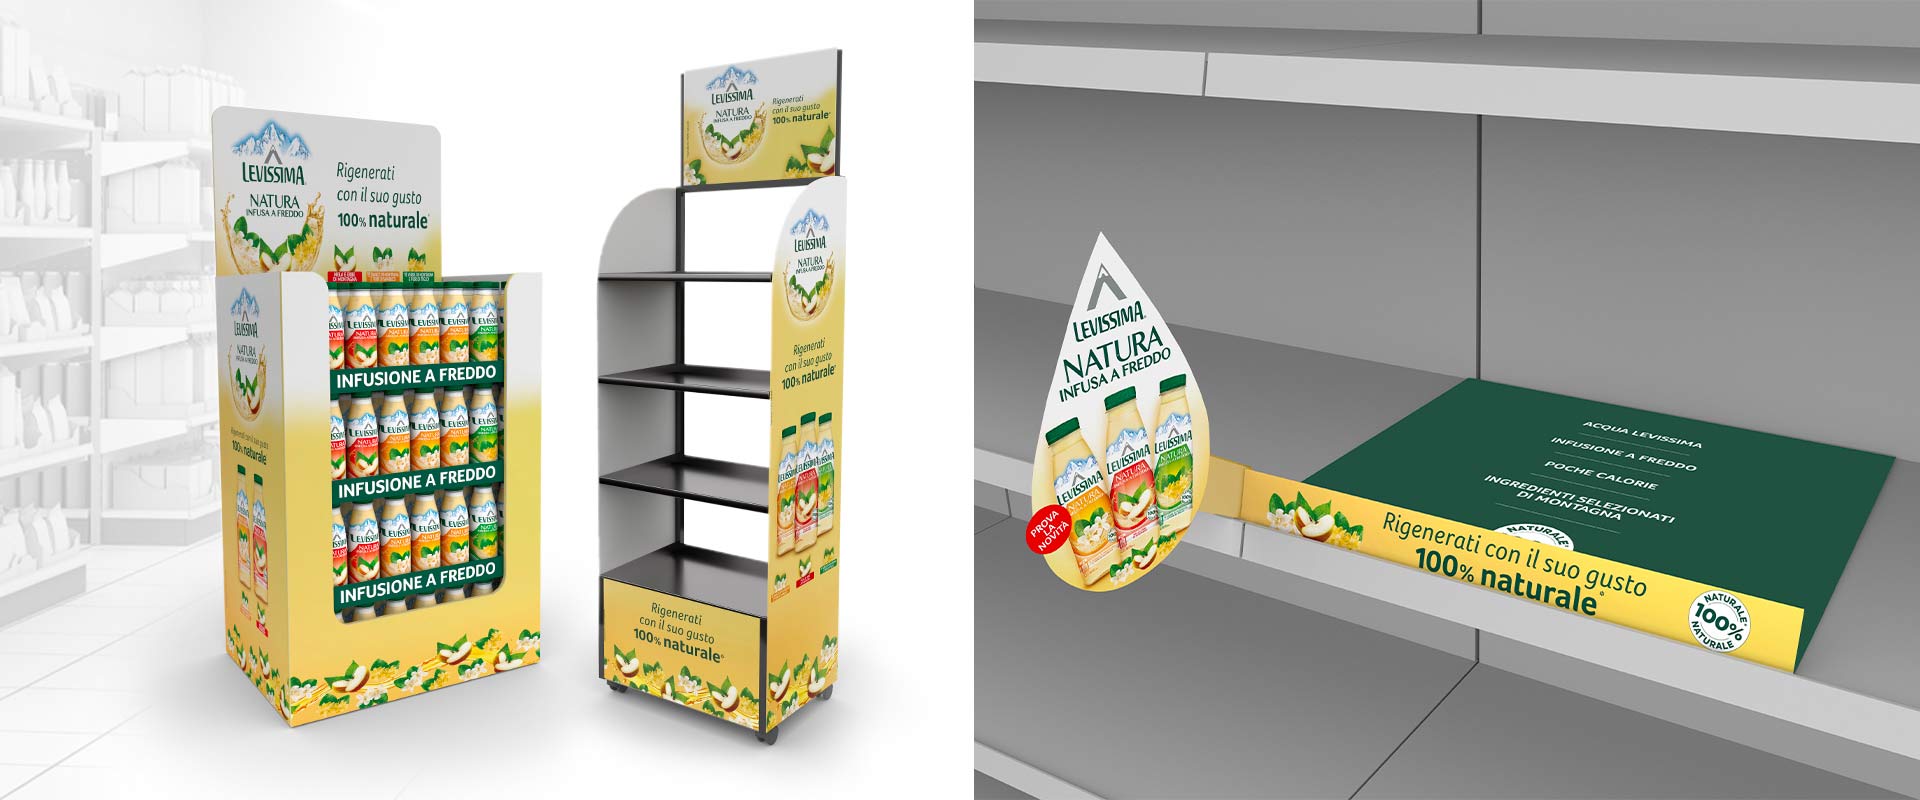 ATC materials for Levissima Natura launch project: on-shelf area